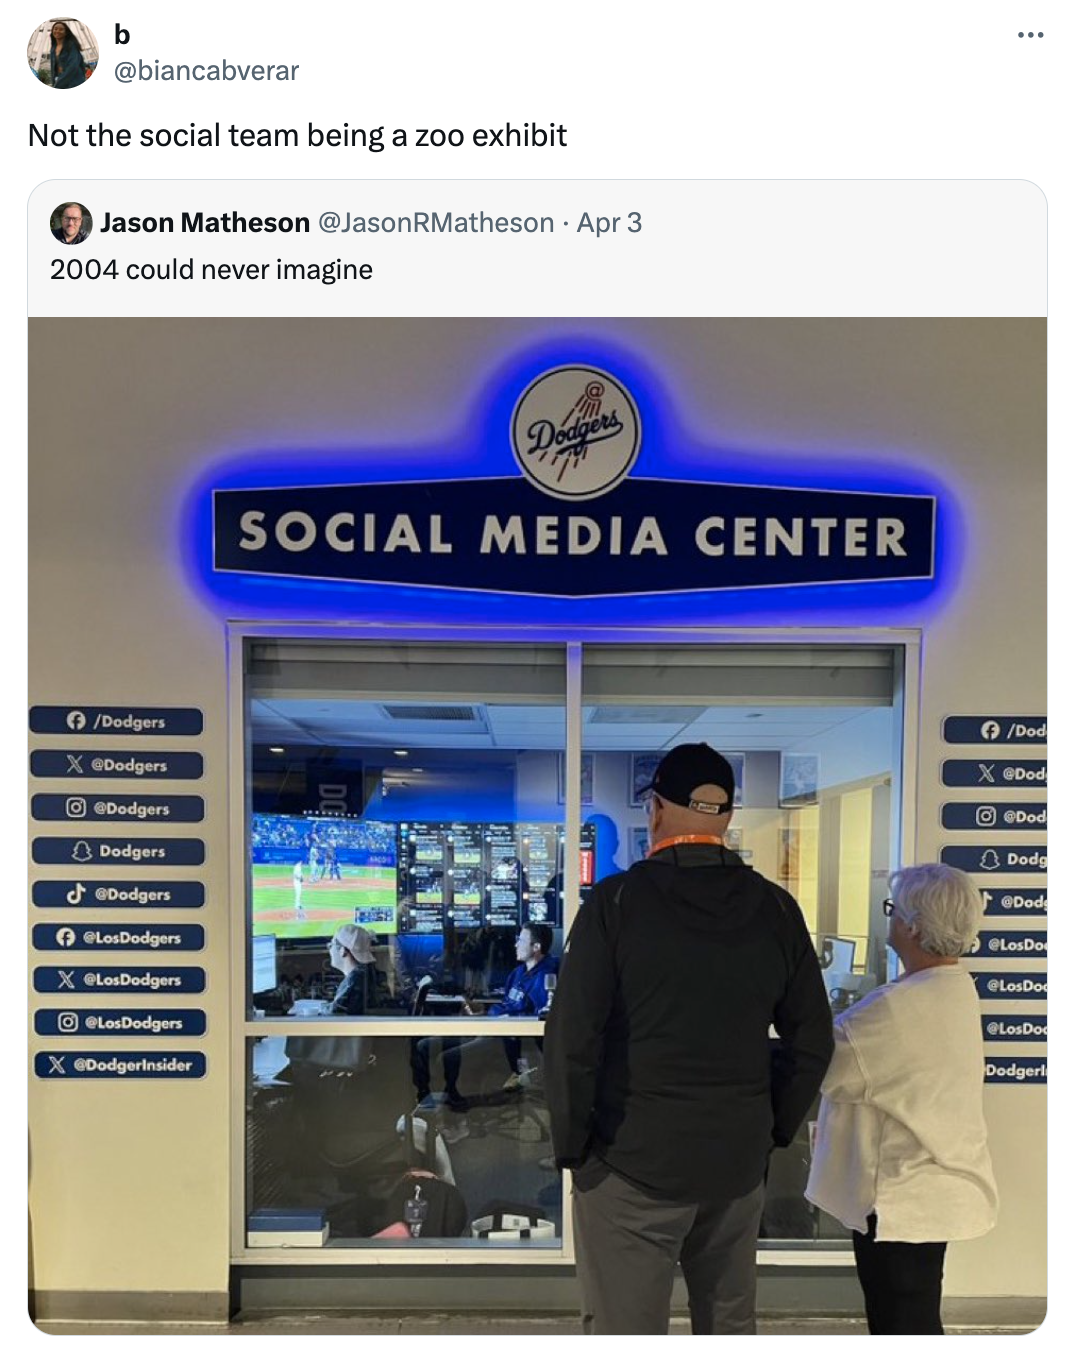 display advertising - Not the social team being a zoo exhibit Jason Matheson could never imagine Dodgers Xedge Dodgers Dodgers d00odgers Dodgers X Dodgers Xedged Social Media Center D Xod Do 00od D